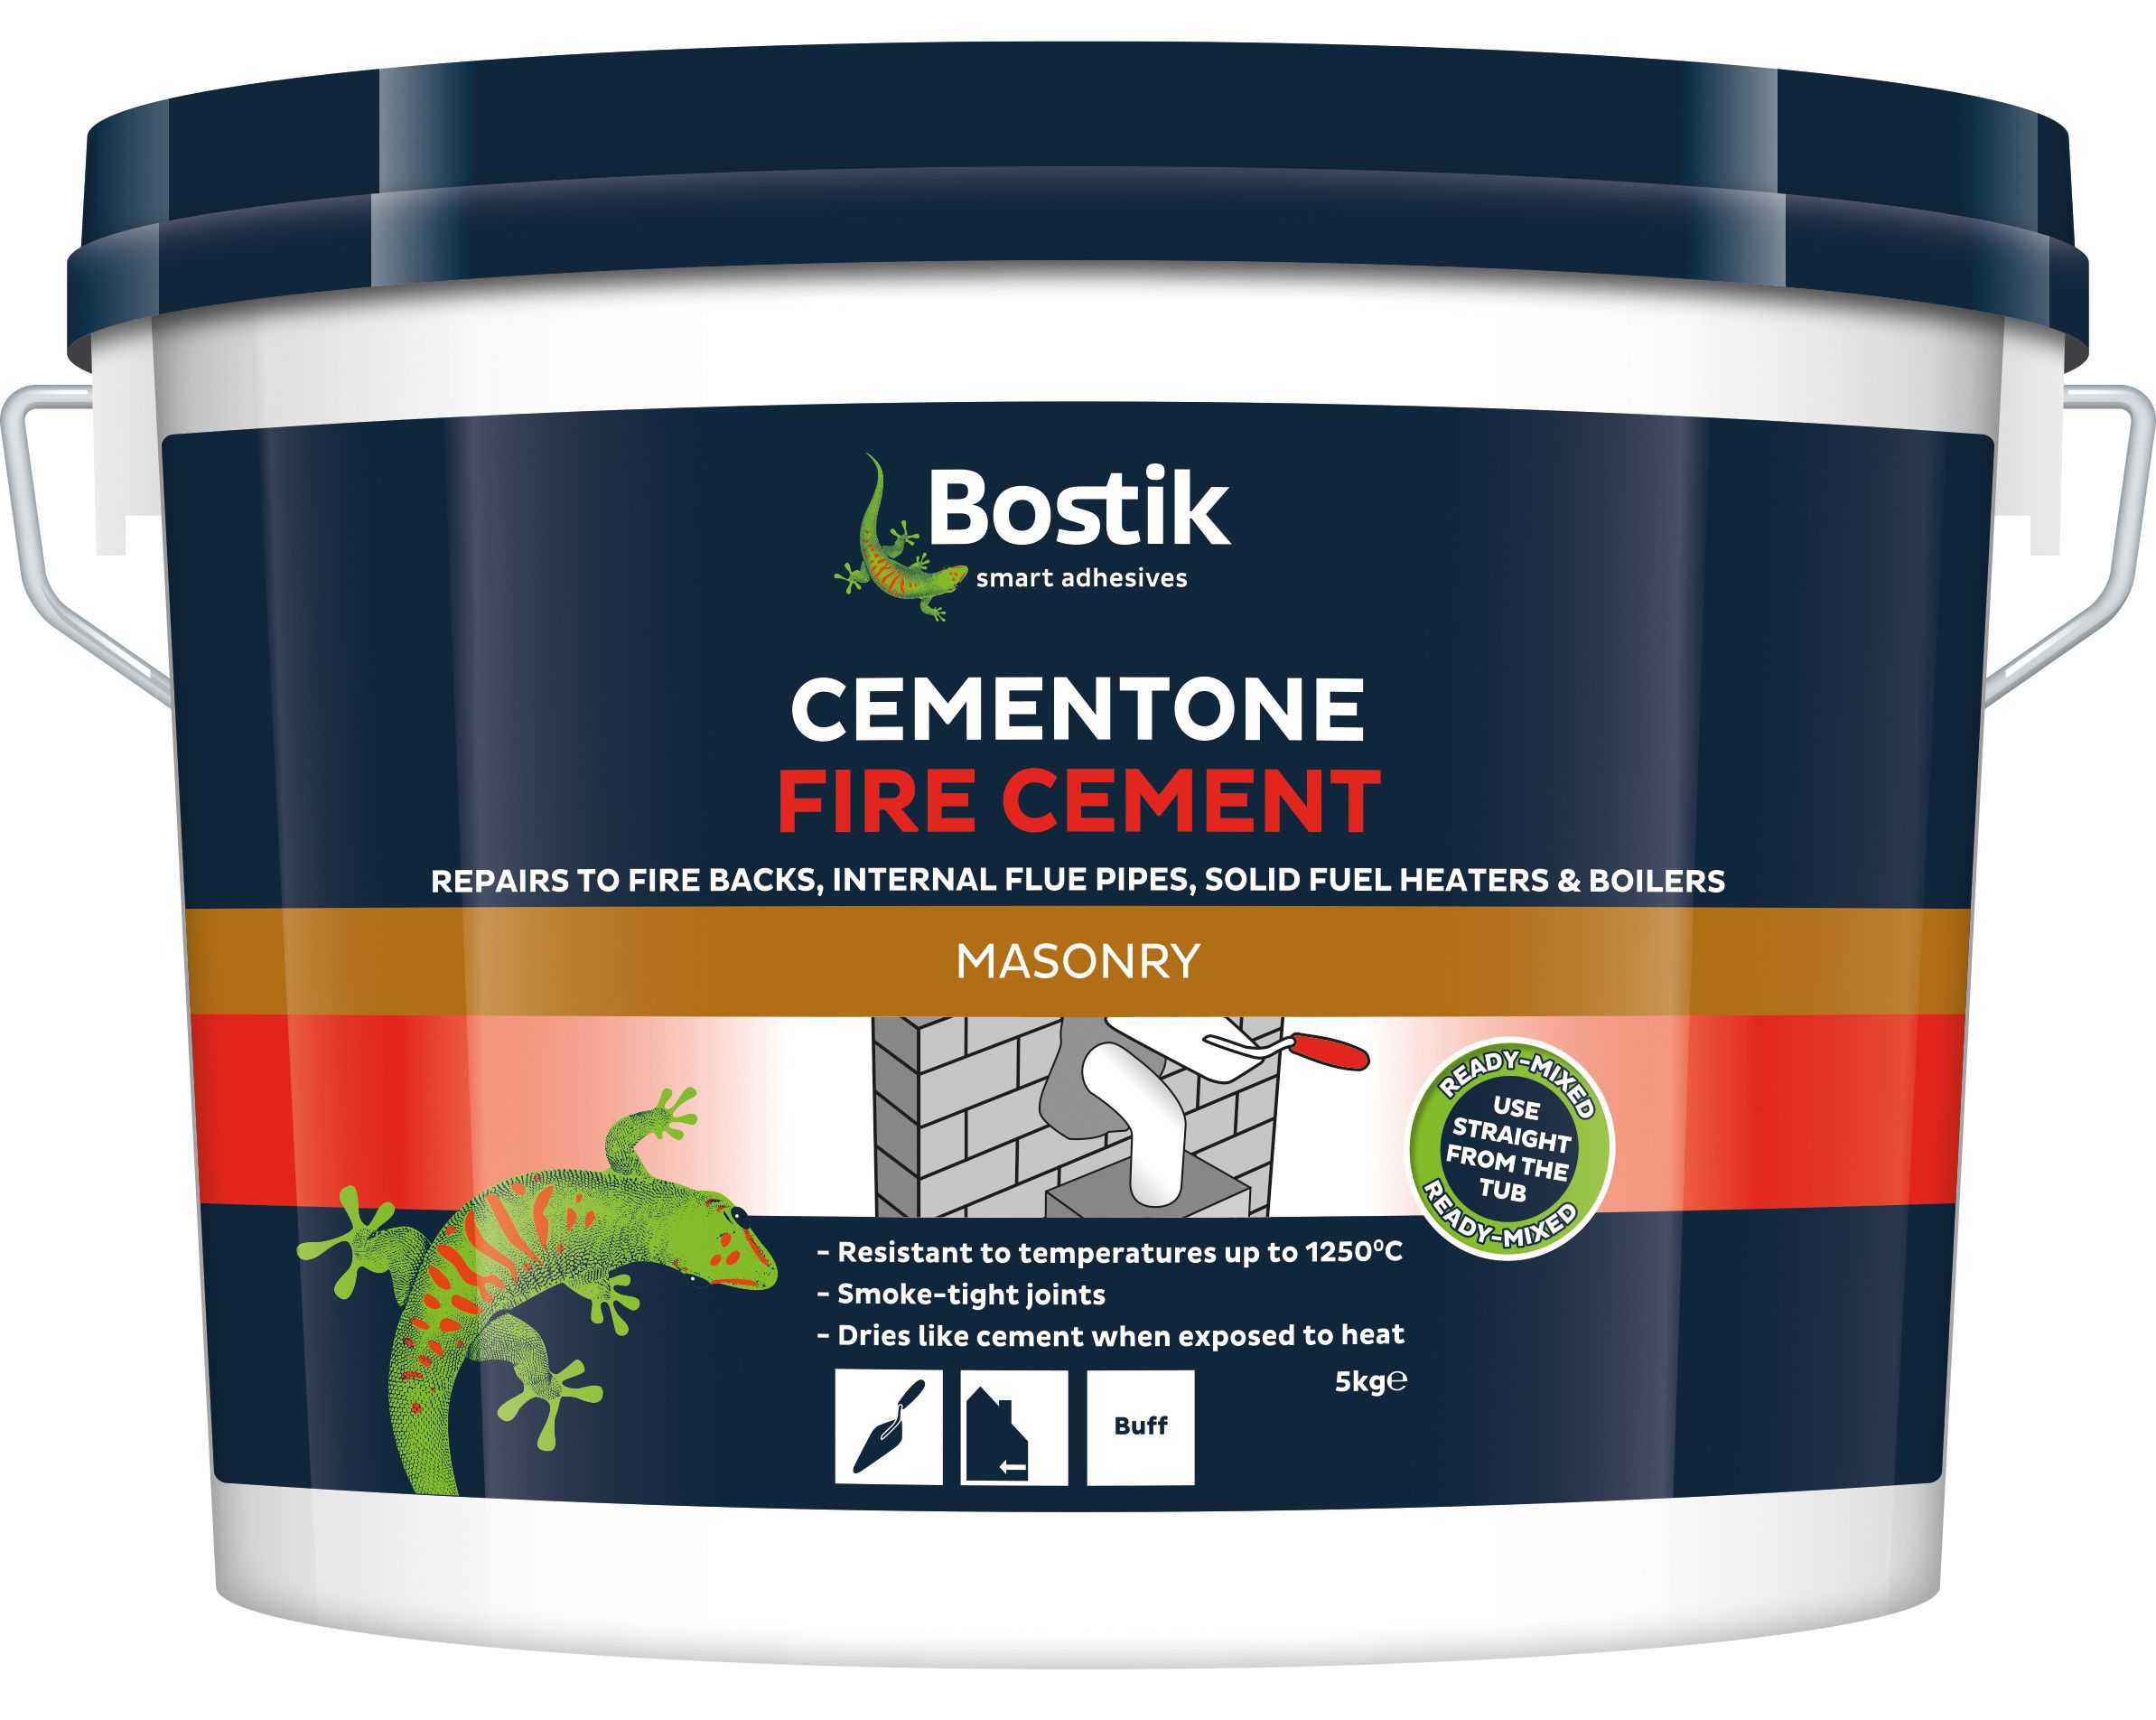 Bostik Cementone Ready to Use Fire Cement 5kg Plastic Tub | Departments